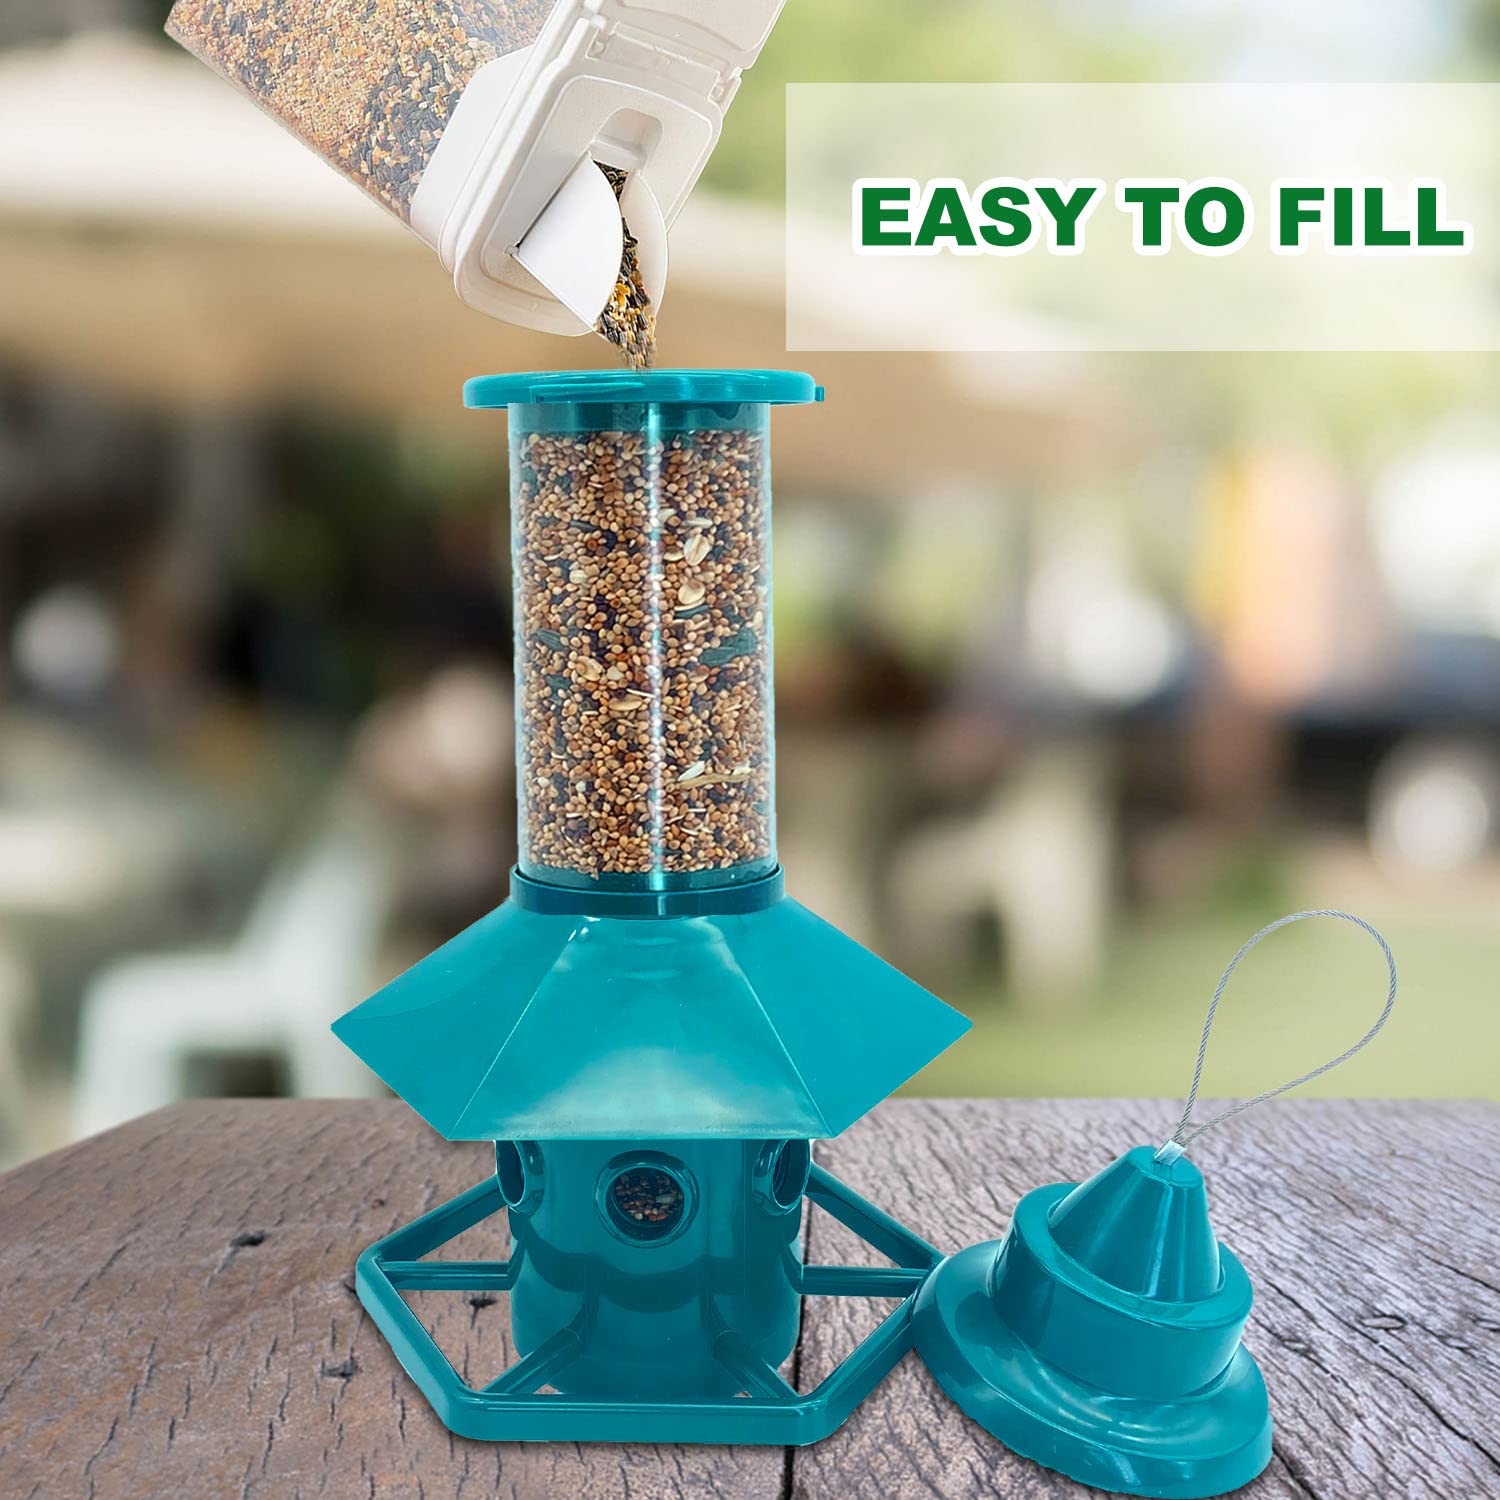 Squirrel Proof Bird Feeder for Outdoors Hanging, Gravity Protection Squirrel Proof Wild Bird Feeders for Outside